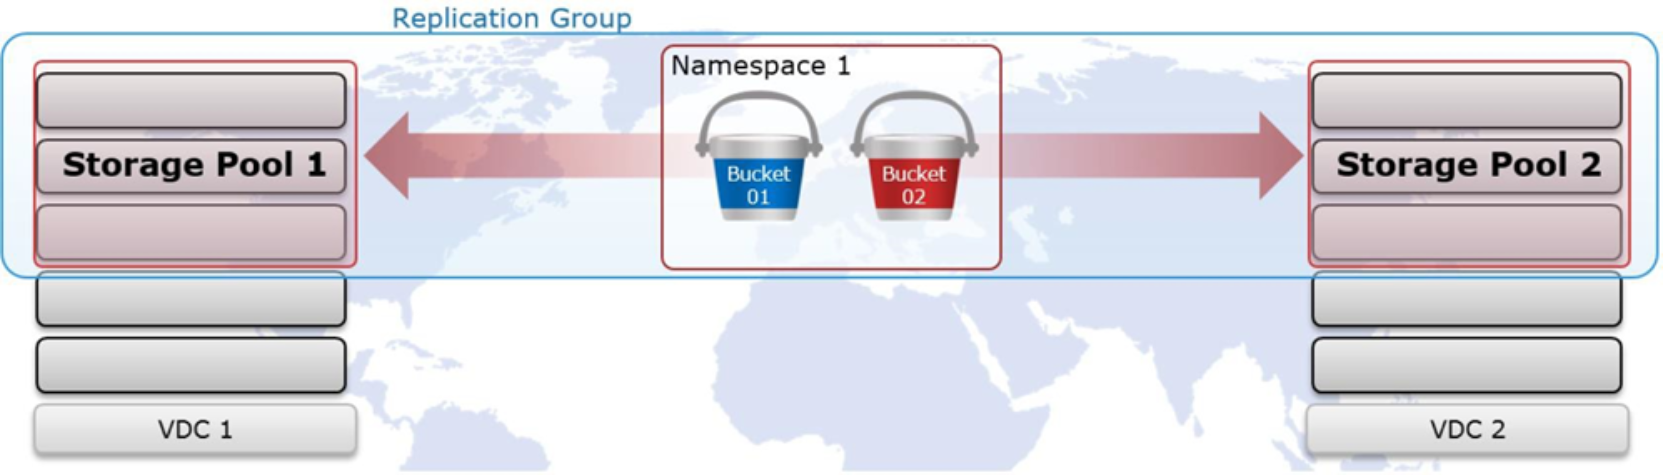 A global replication group spanning two geographically federated VDCs